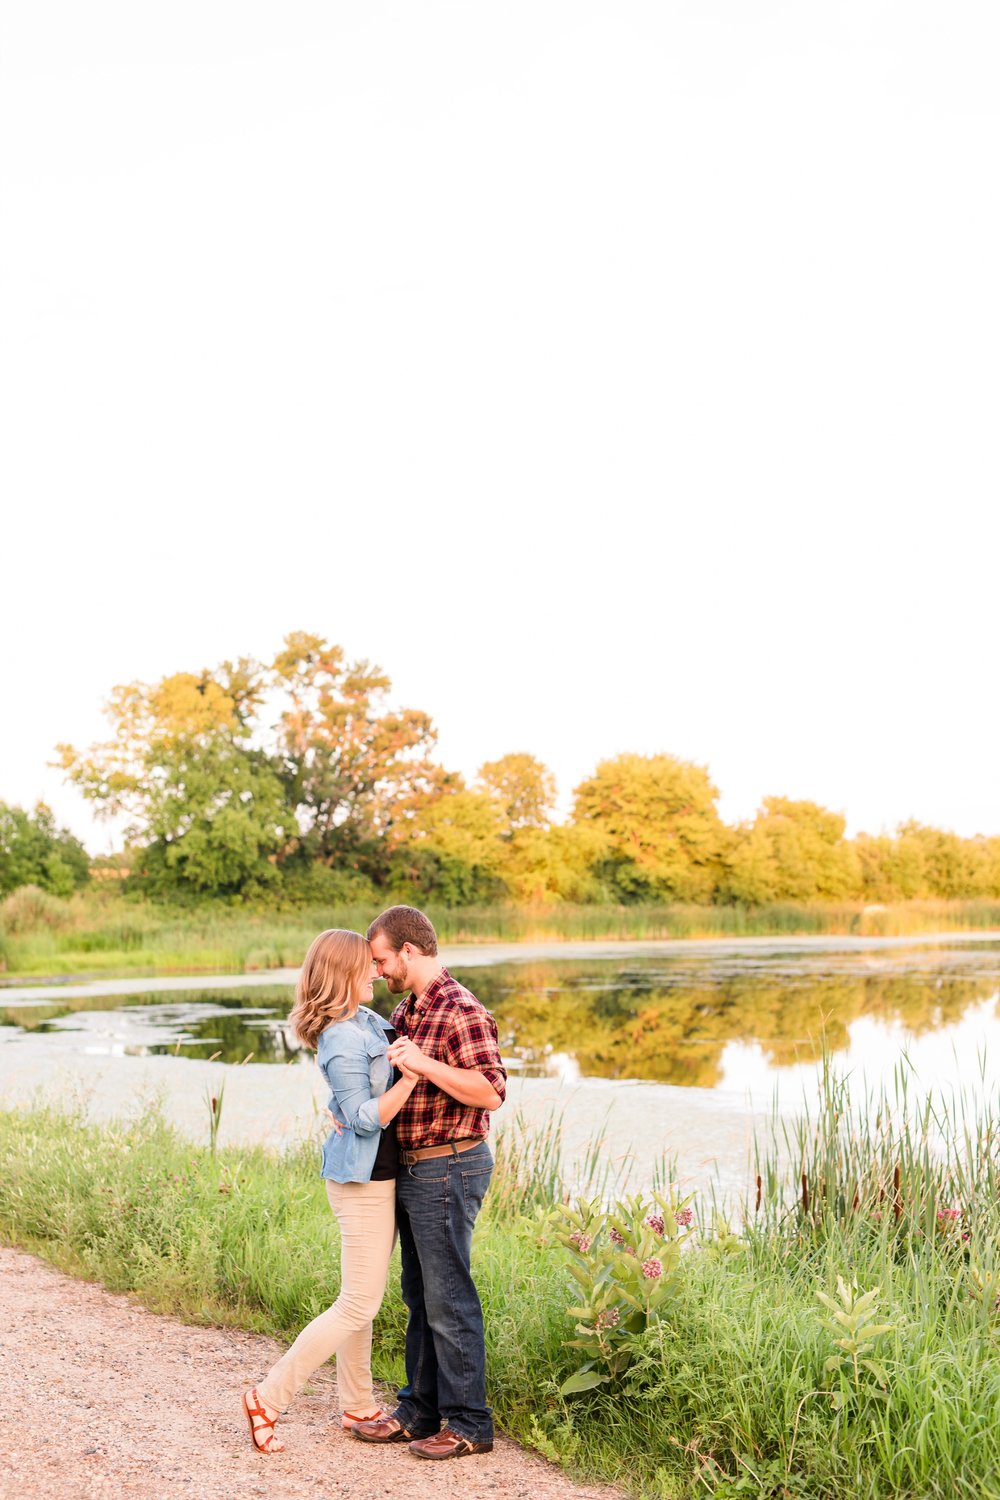 AmberLangerudPhotography_Countryside Engagement Session in Minnesota_3130.jpg